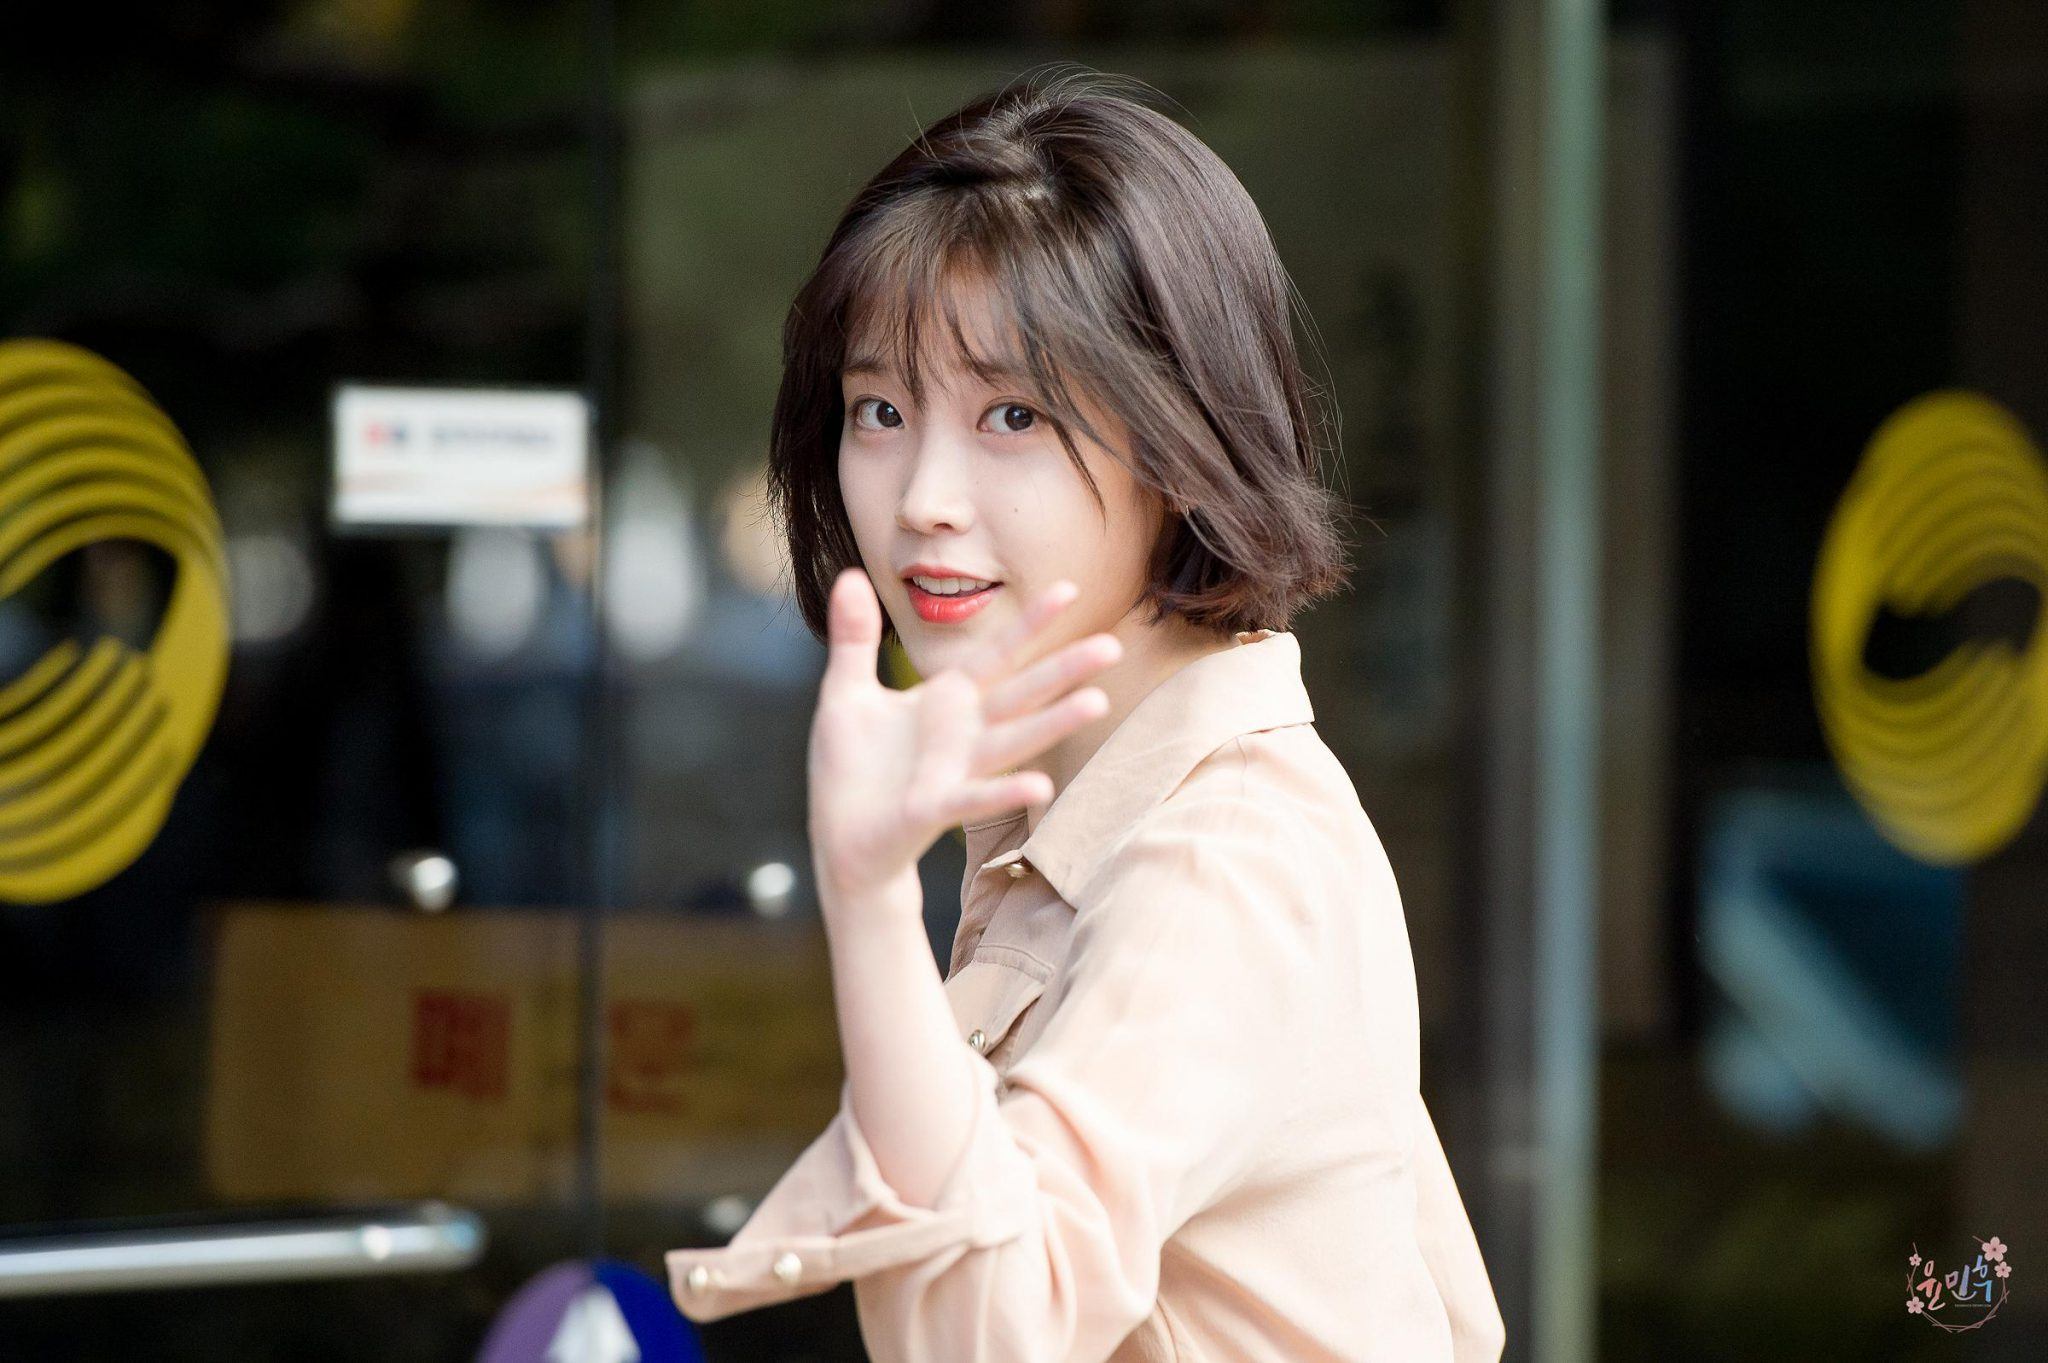 6. IU's short blonde hair in "You & I" music video - wide 3